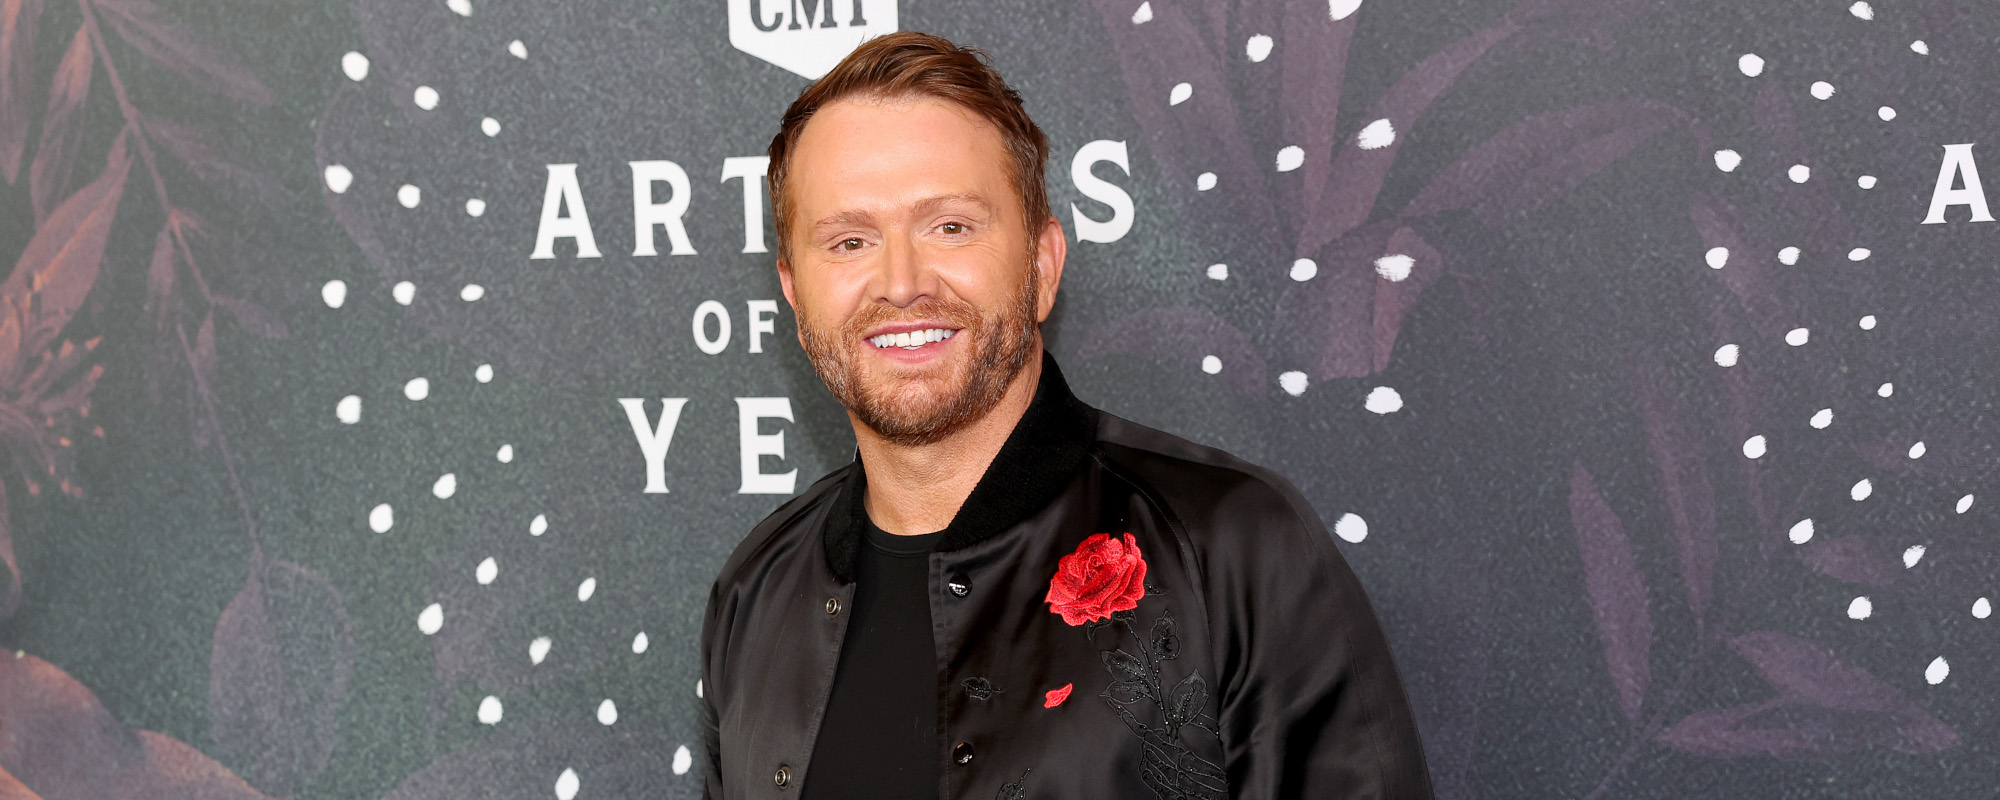 Shane McAnally on Being Nominated for Grammy Songwriter of the Year: “I Was Truly in Shock”